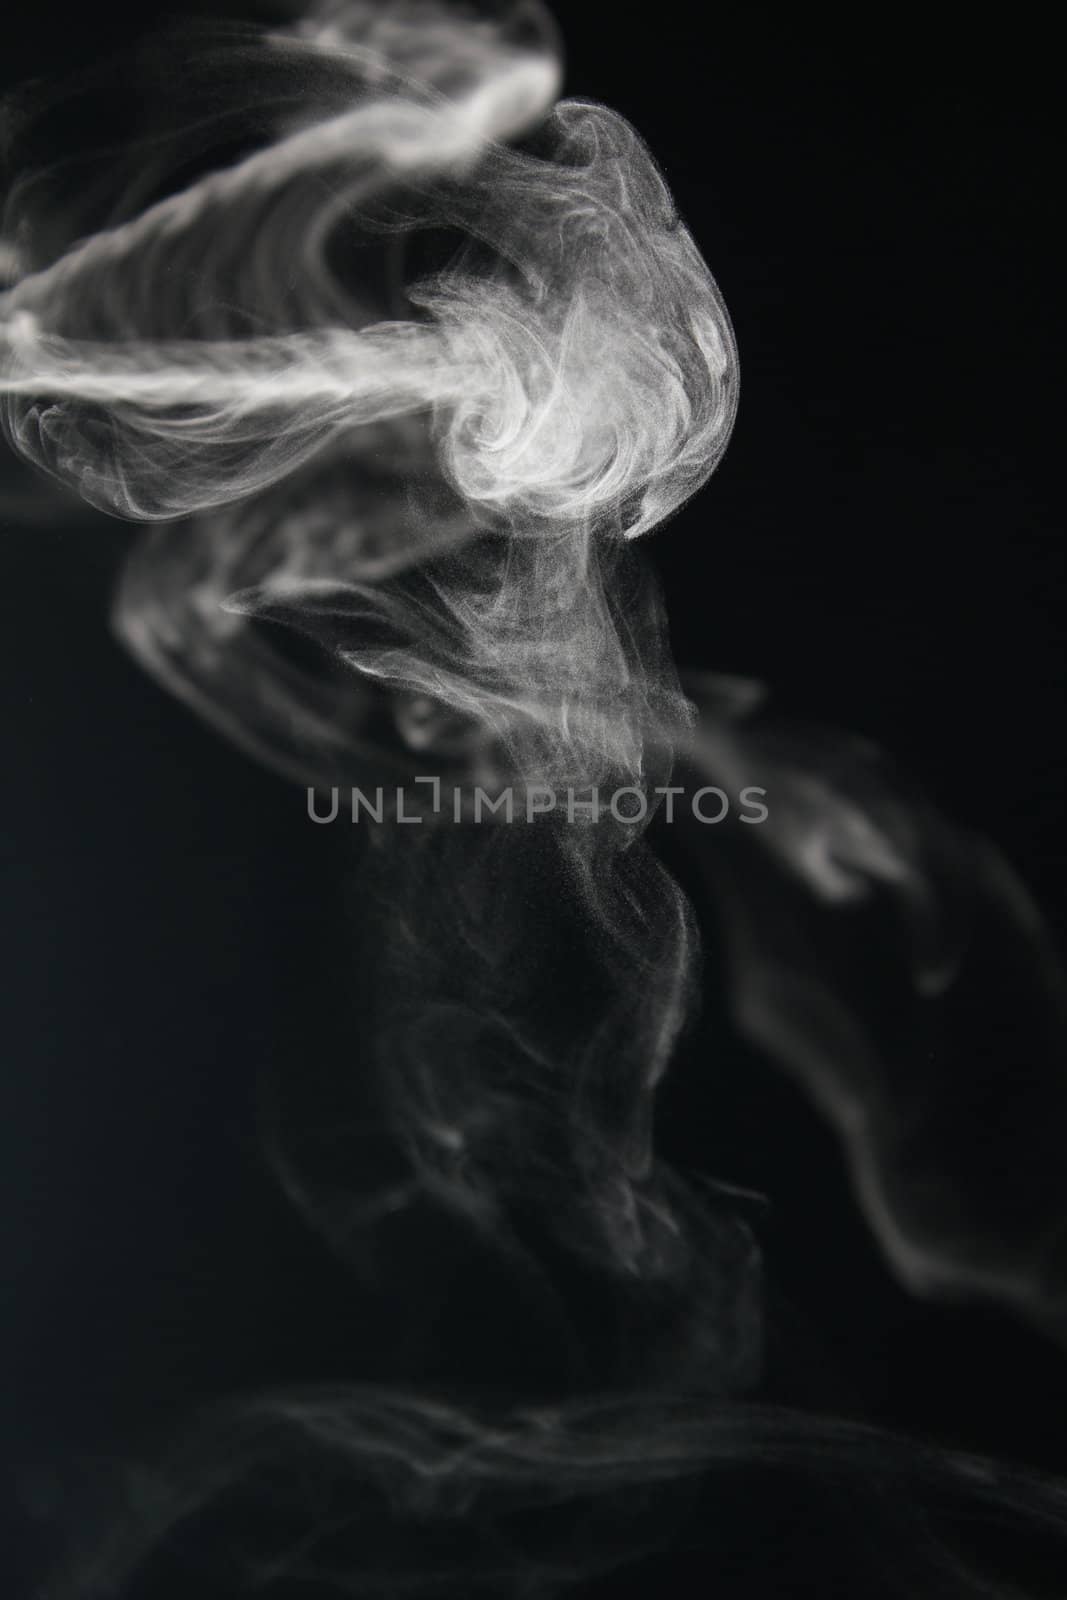 an abstract smoke picture in front of a black background